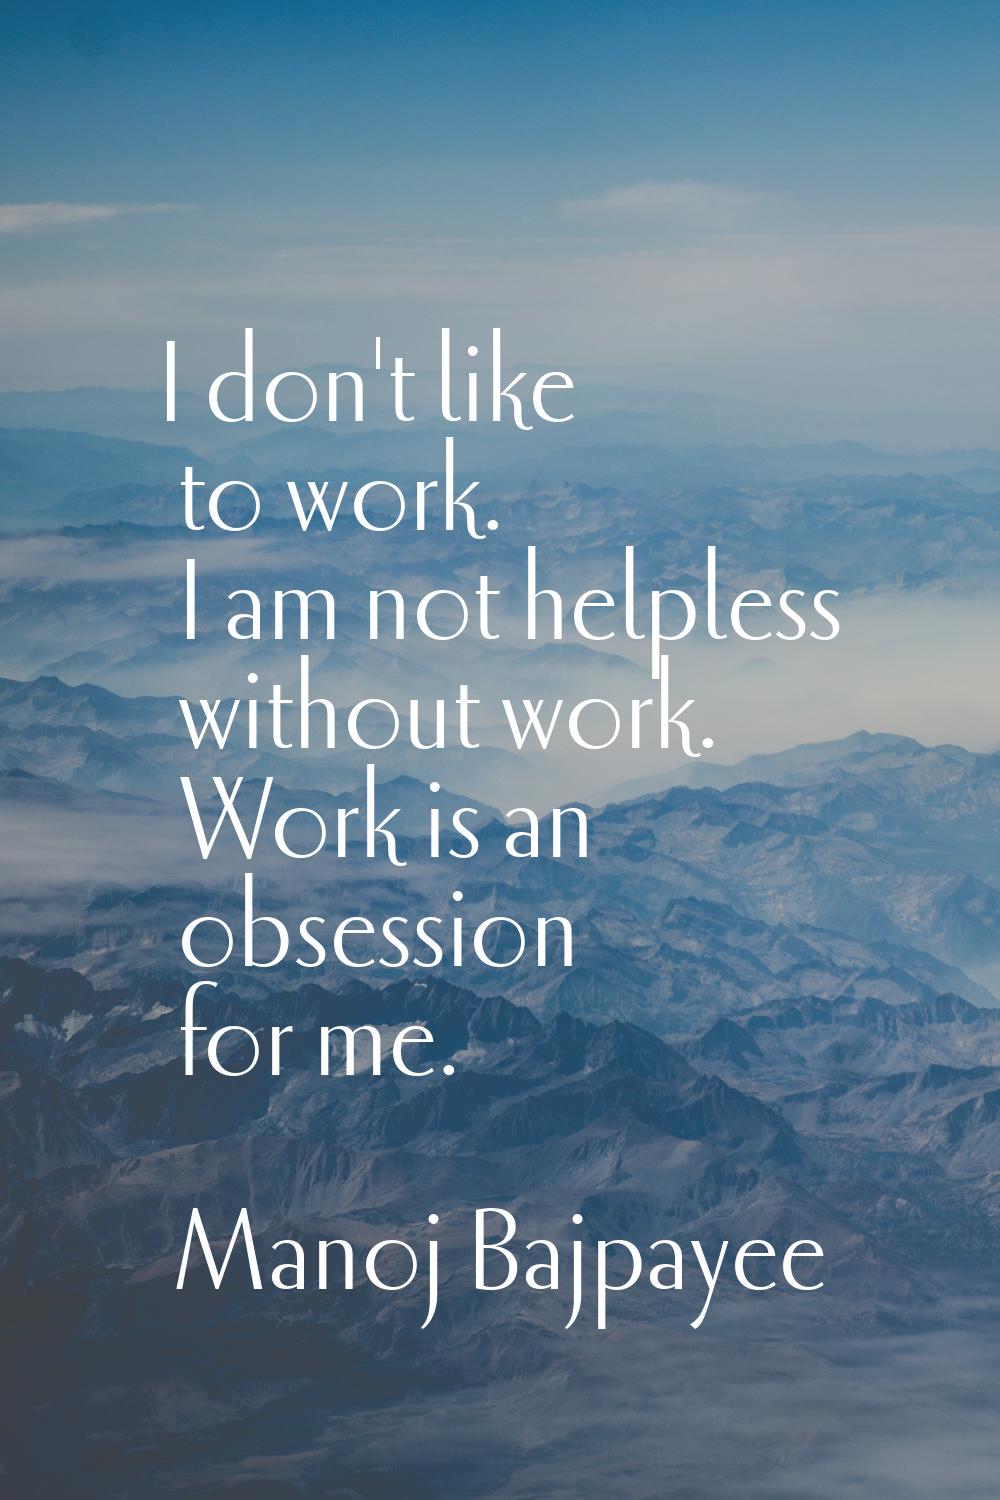 I don't like to work. I am not helpless without work. Work is an obsession for me.